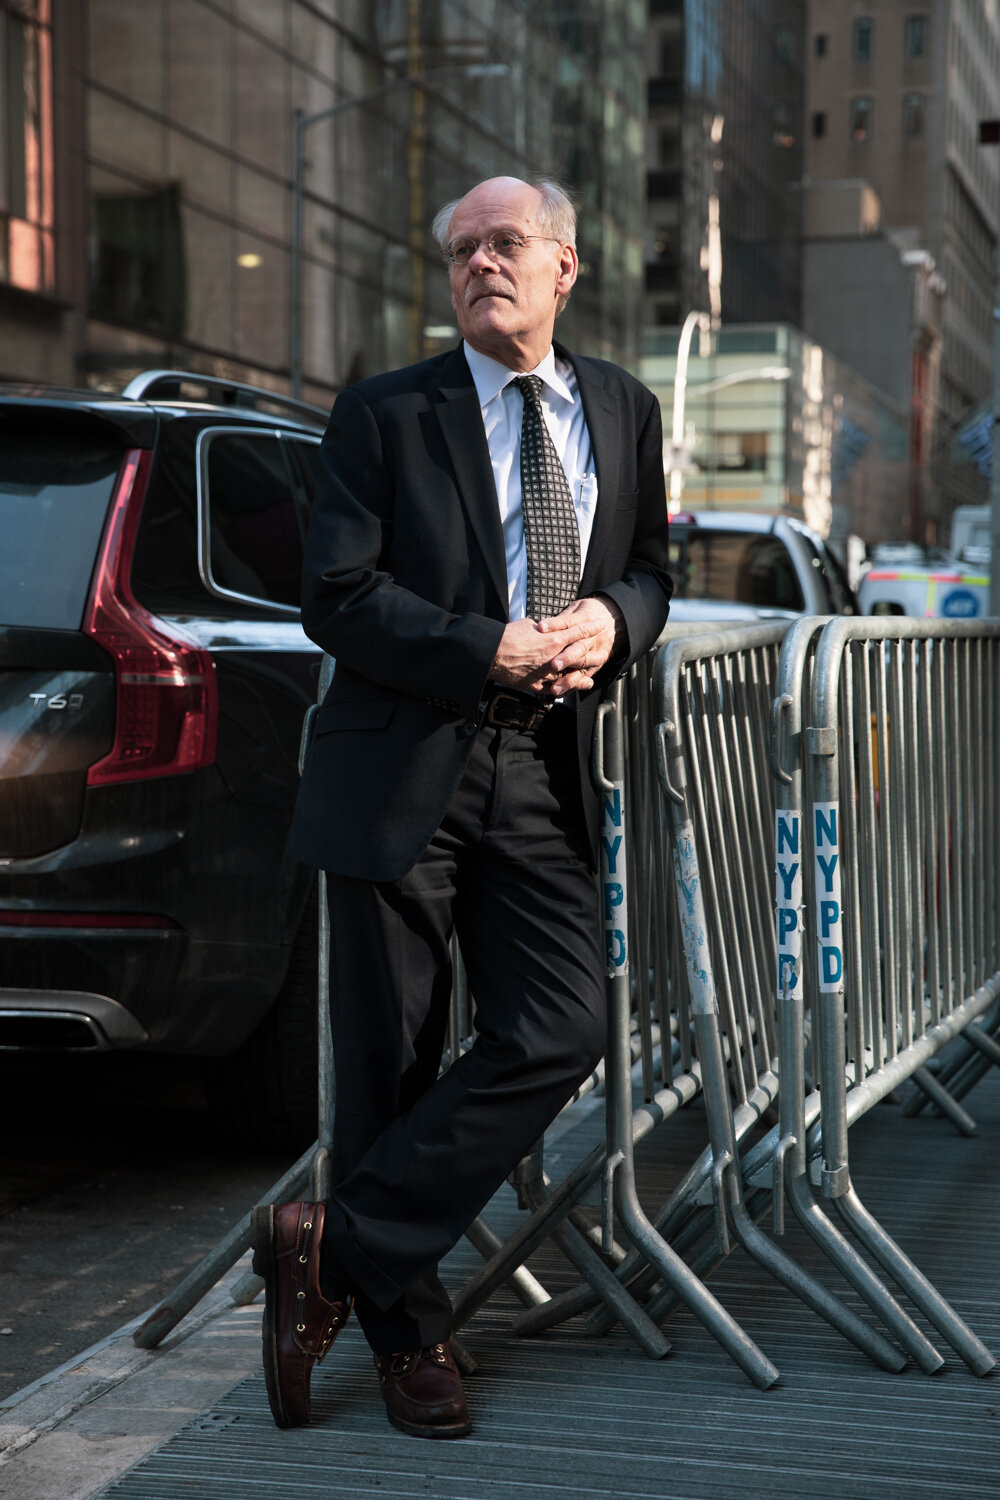  20190219 New York City  Stefan Ingves, at the time governor of the central bank of Sweden. Shot for Dagens Industri in New York. 